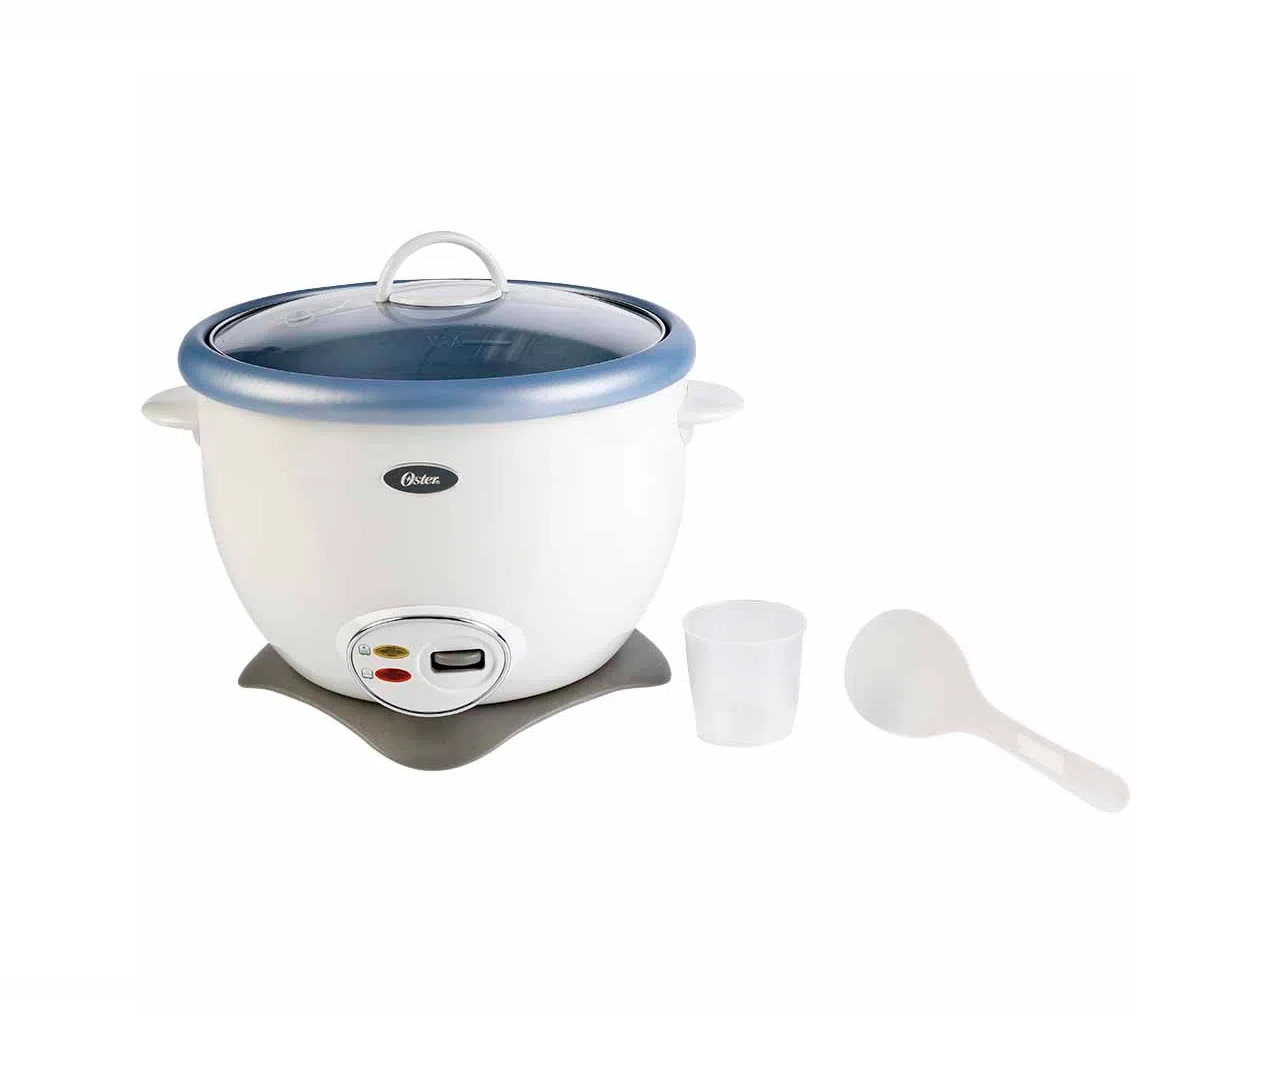 Oster® Multi-Purpose Rice Cooker 12-Cup (cooked)